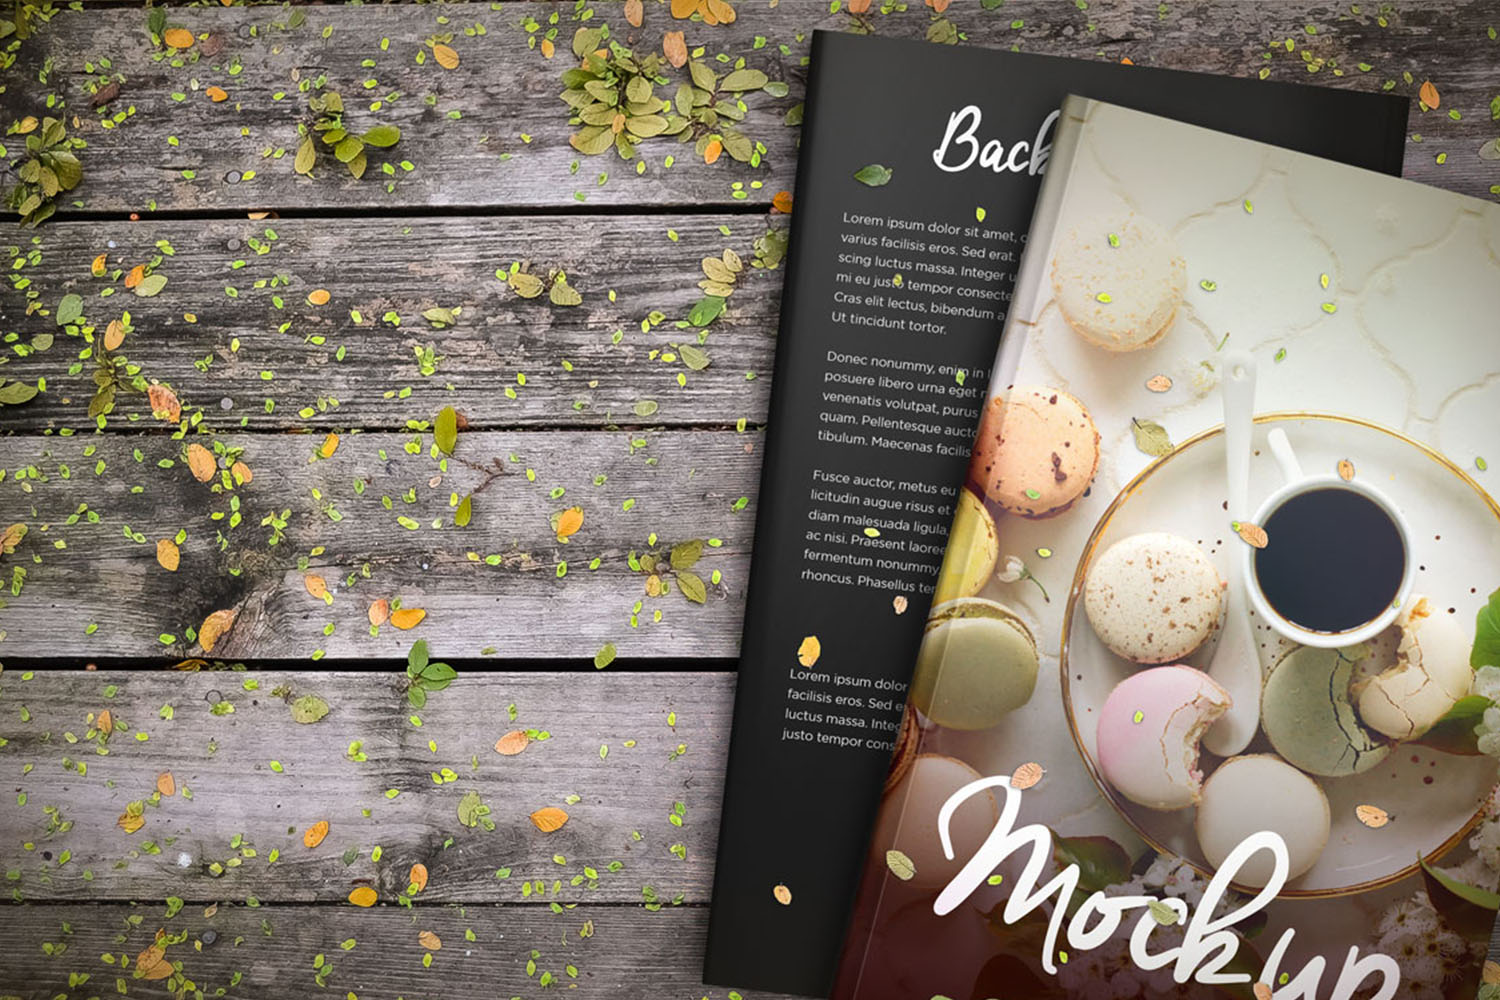 Basil & Spice 5 x 8 Hardcover Book Mockup Free Download